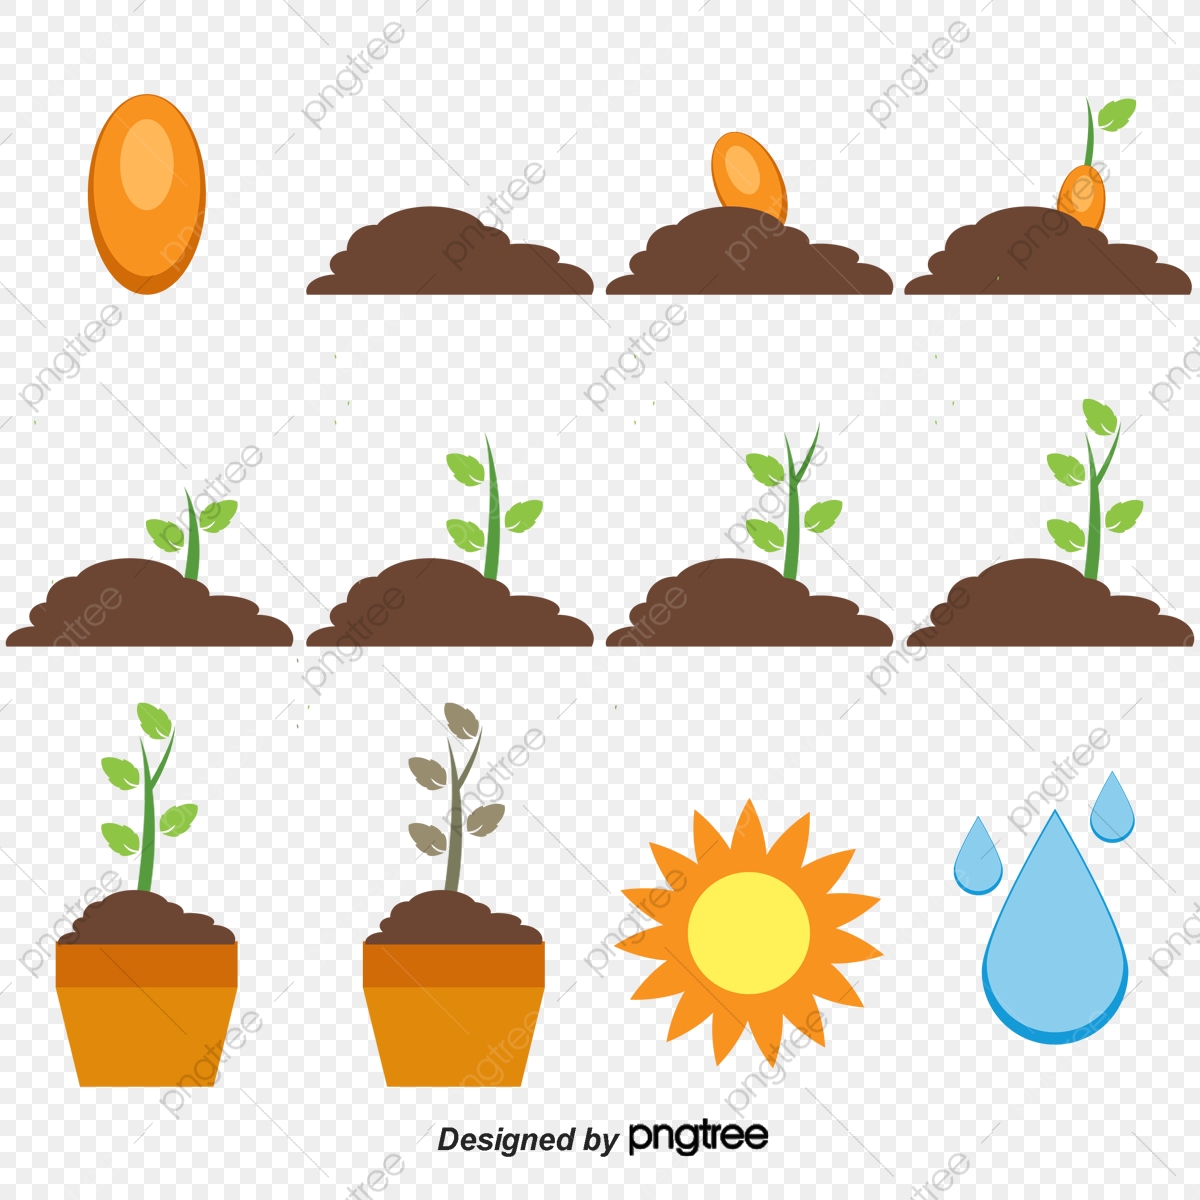 Planting clipart plant growth, Planting plant growth Transparent FREE